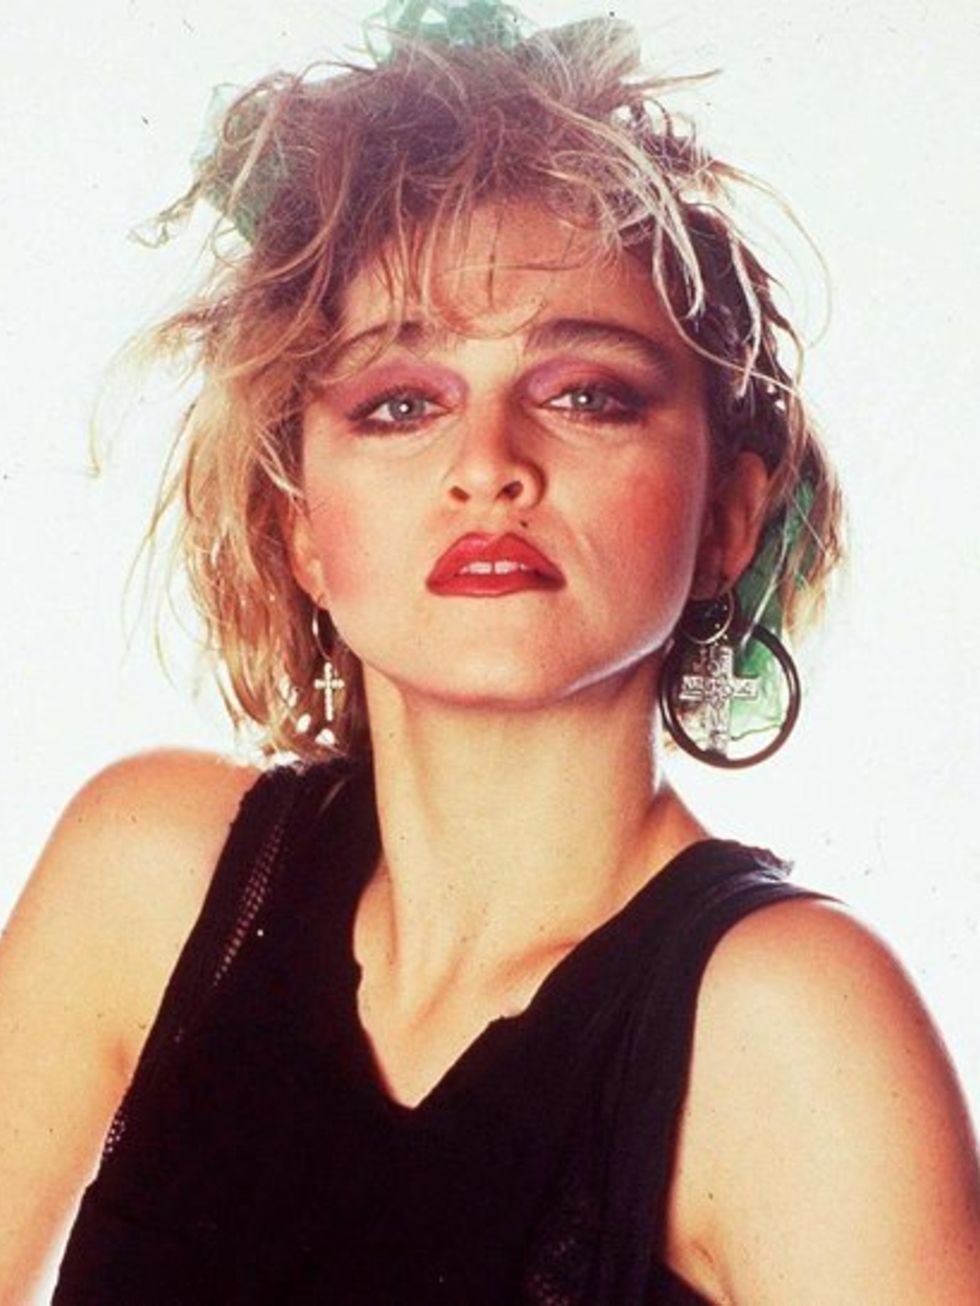 1984
Heavy contouring and a textured bob make Madonna's Like A Virgin look one of her most memorable